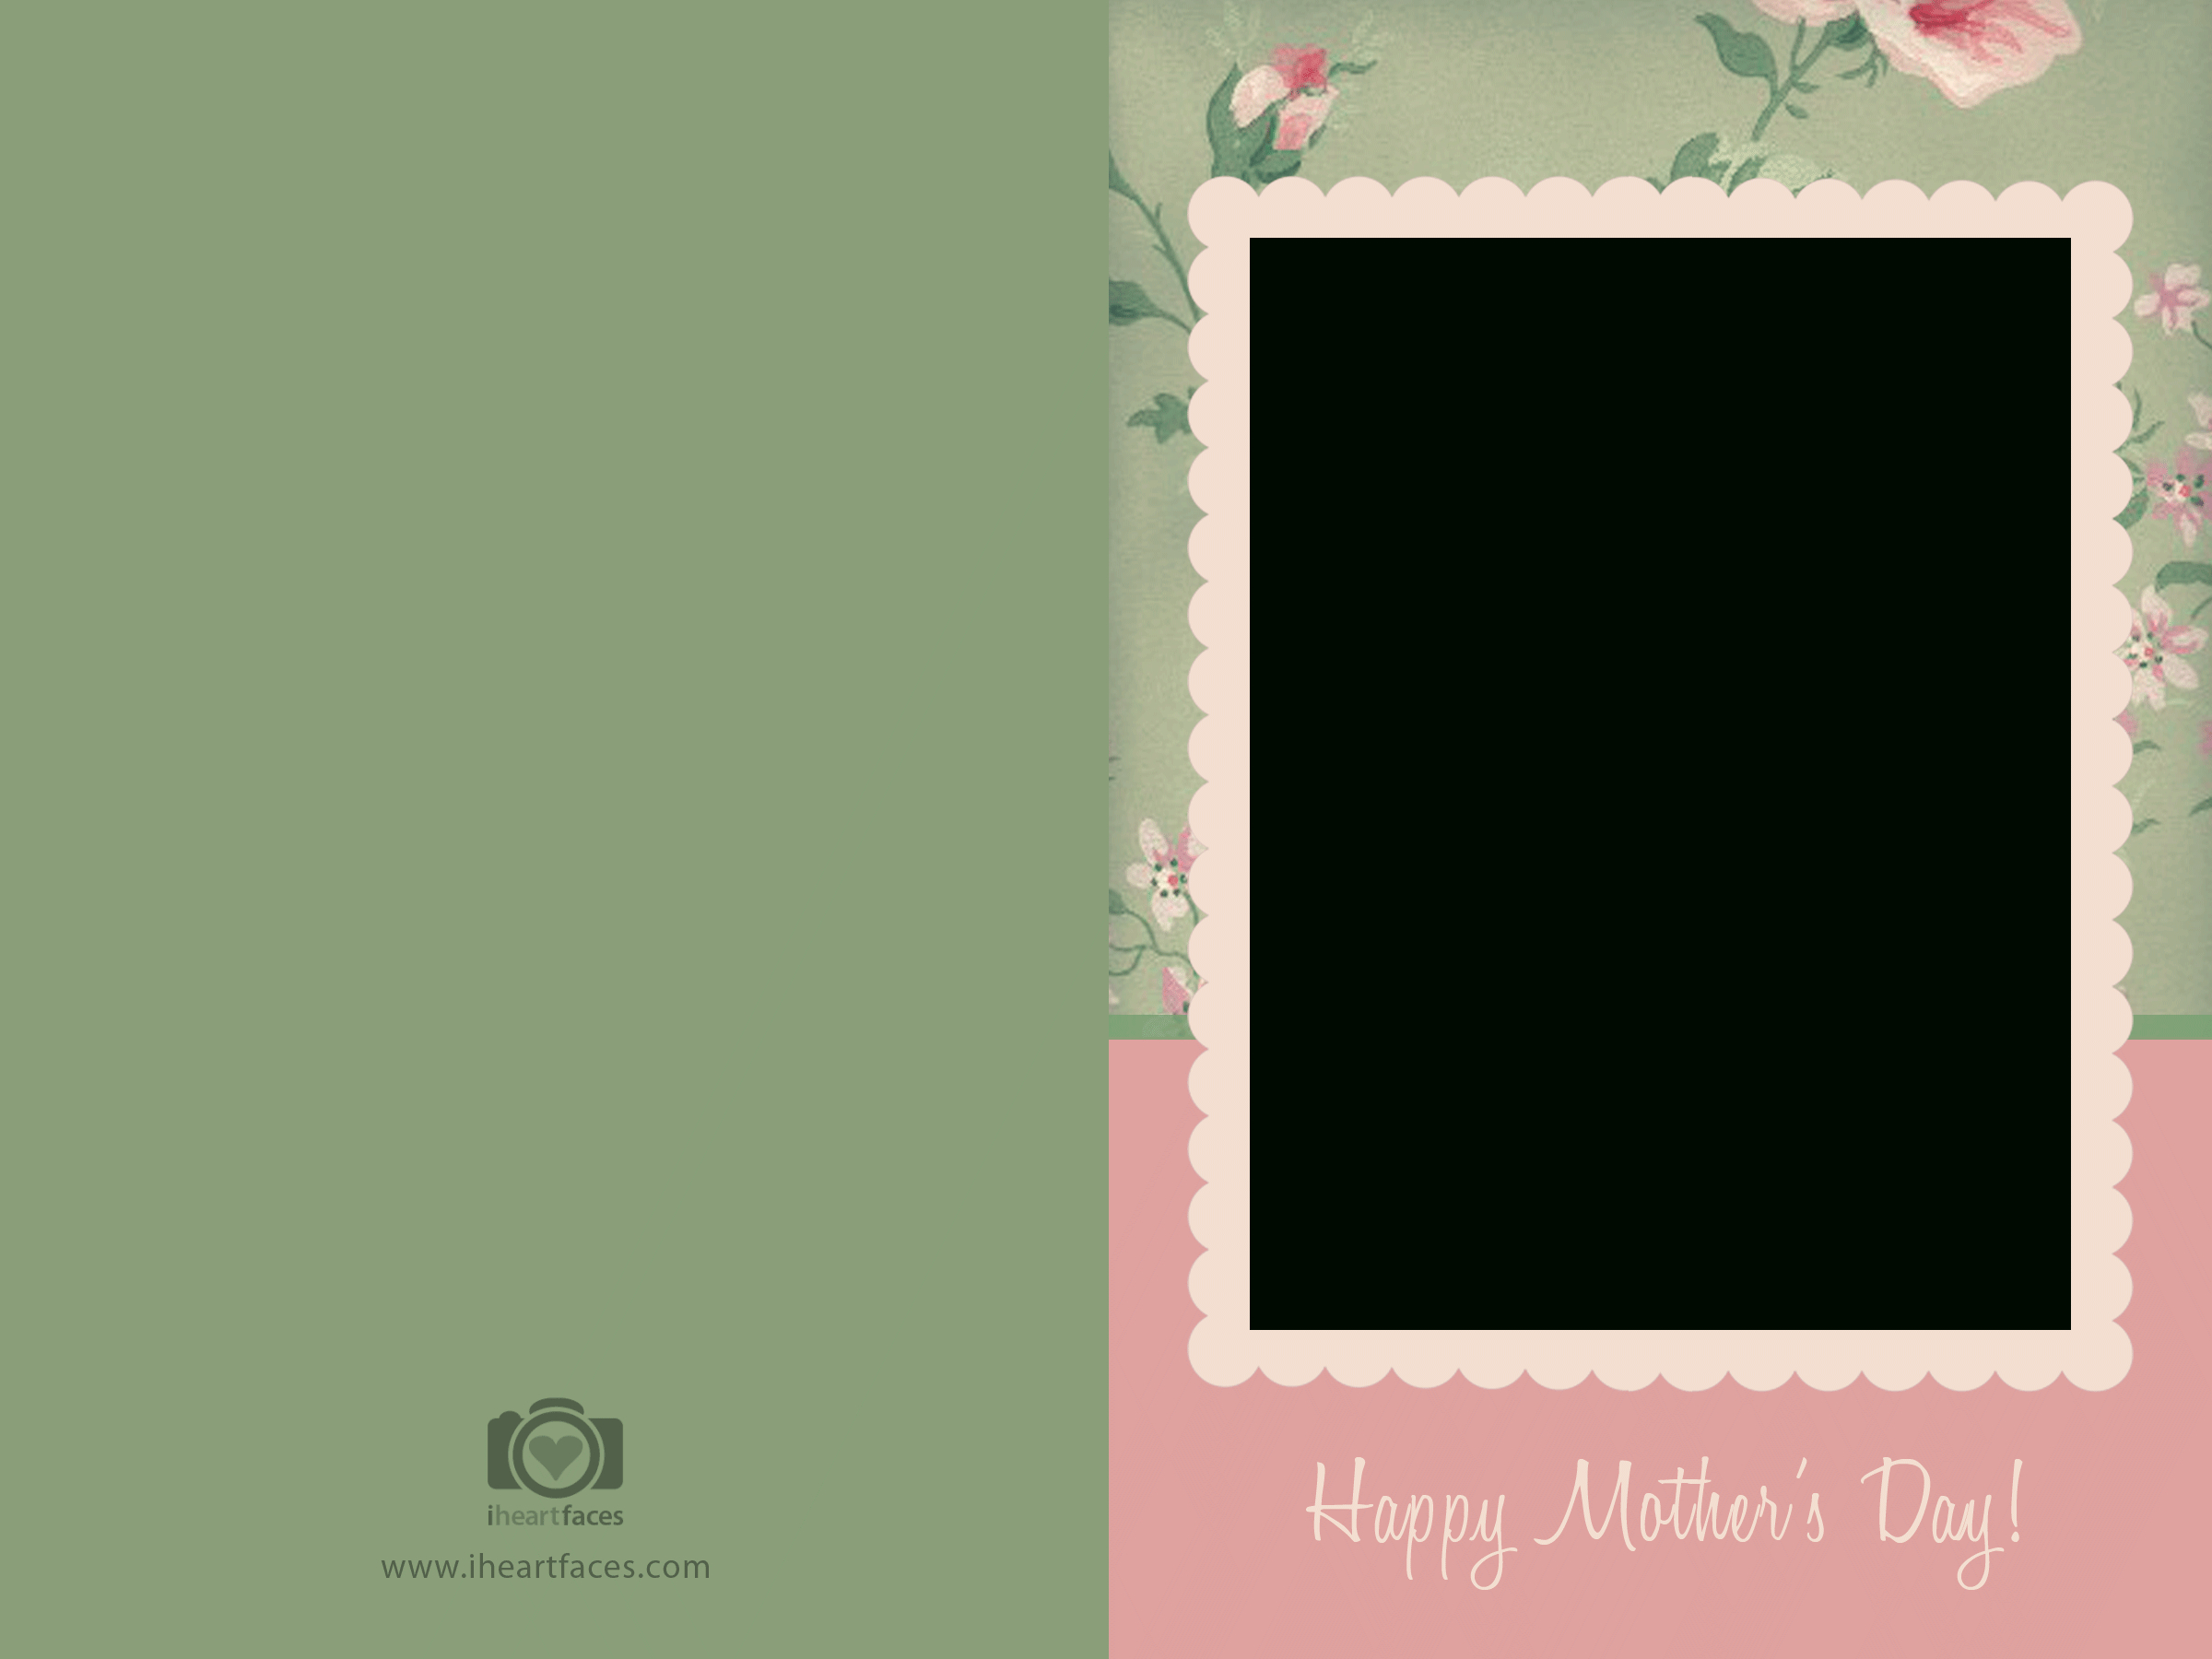 15 Mother's Day Psd Templates Free Images - Mother's Day In Photoshop Birthday Card Template Free